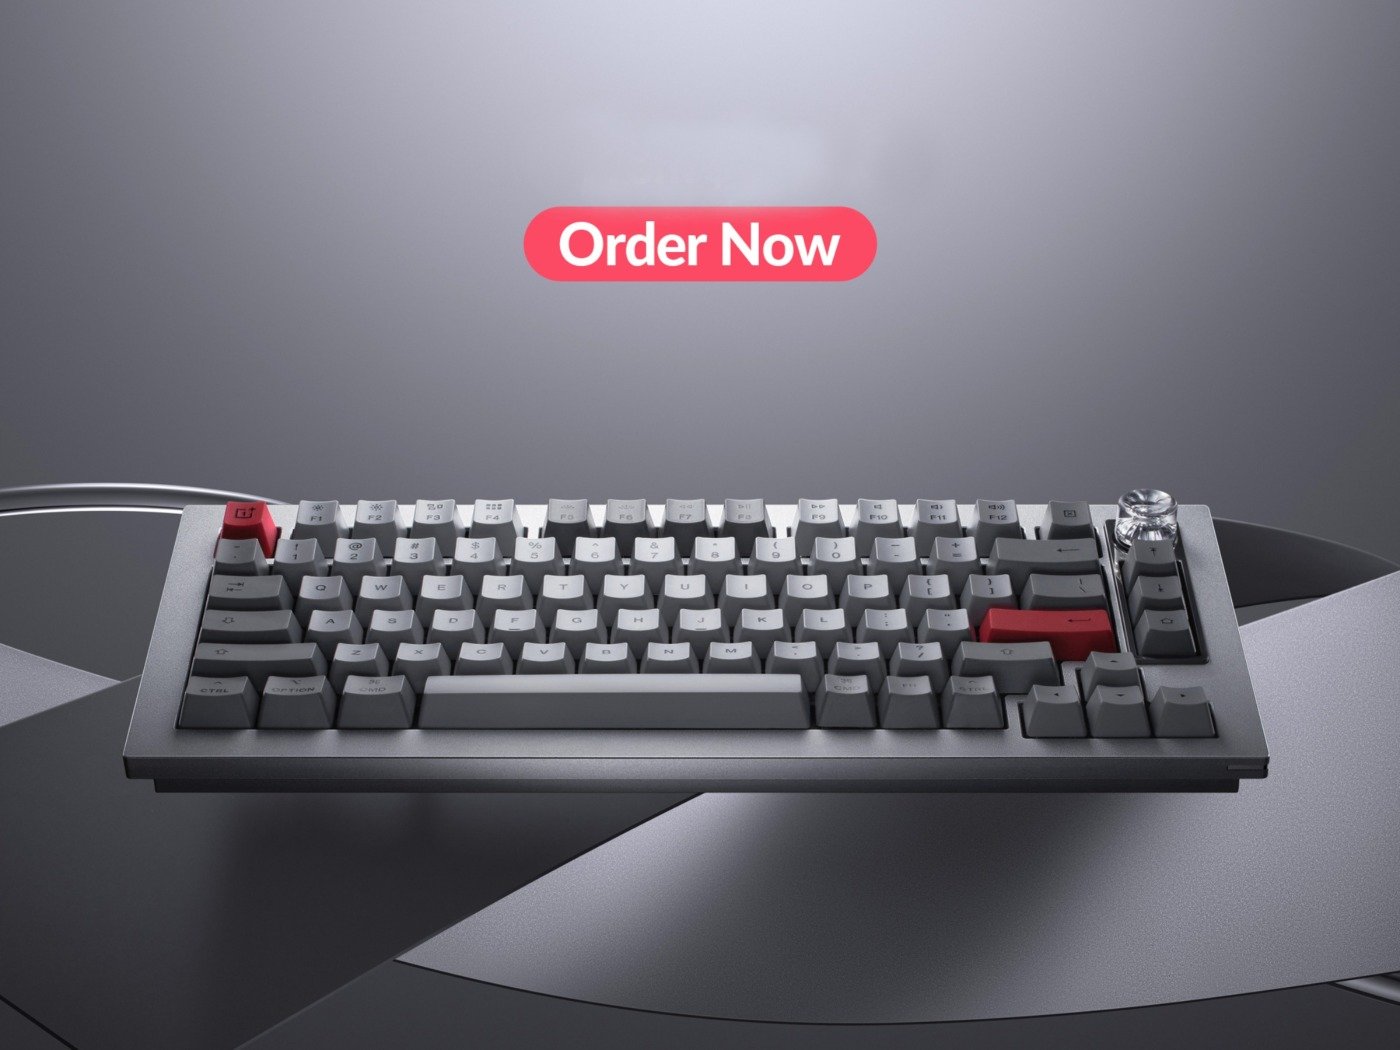 OnePlus Keyboard 81 Pro: mechanical keyboard now available to buy

